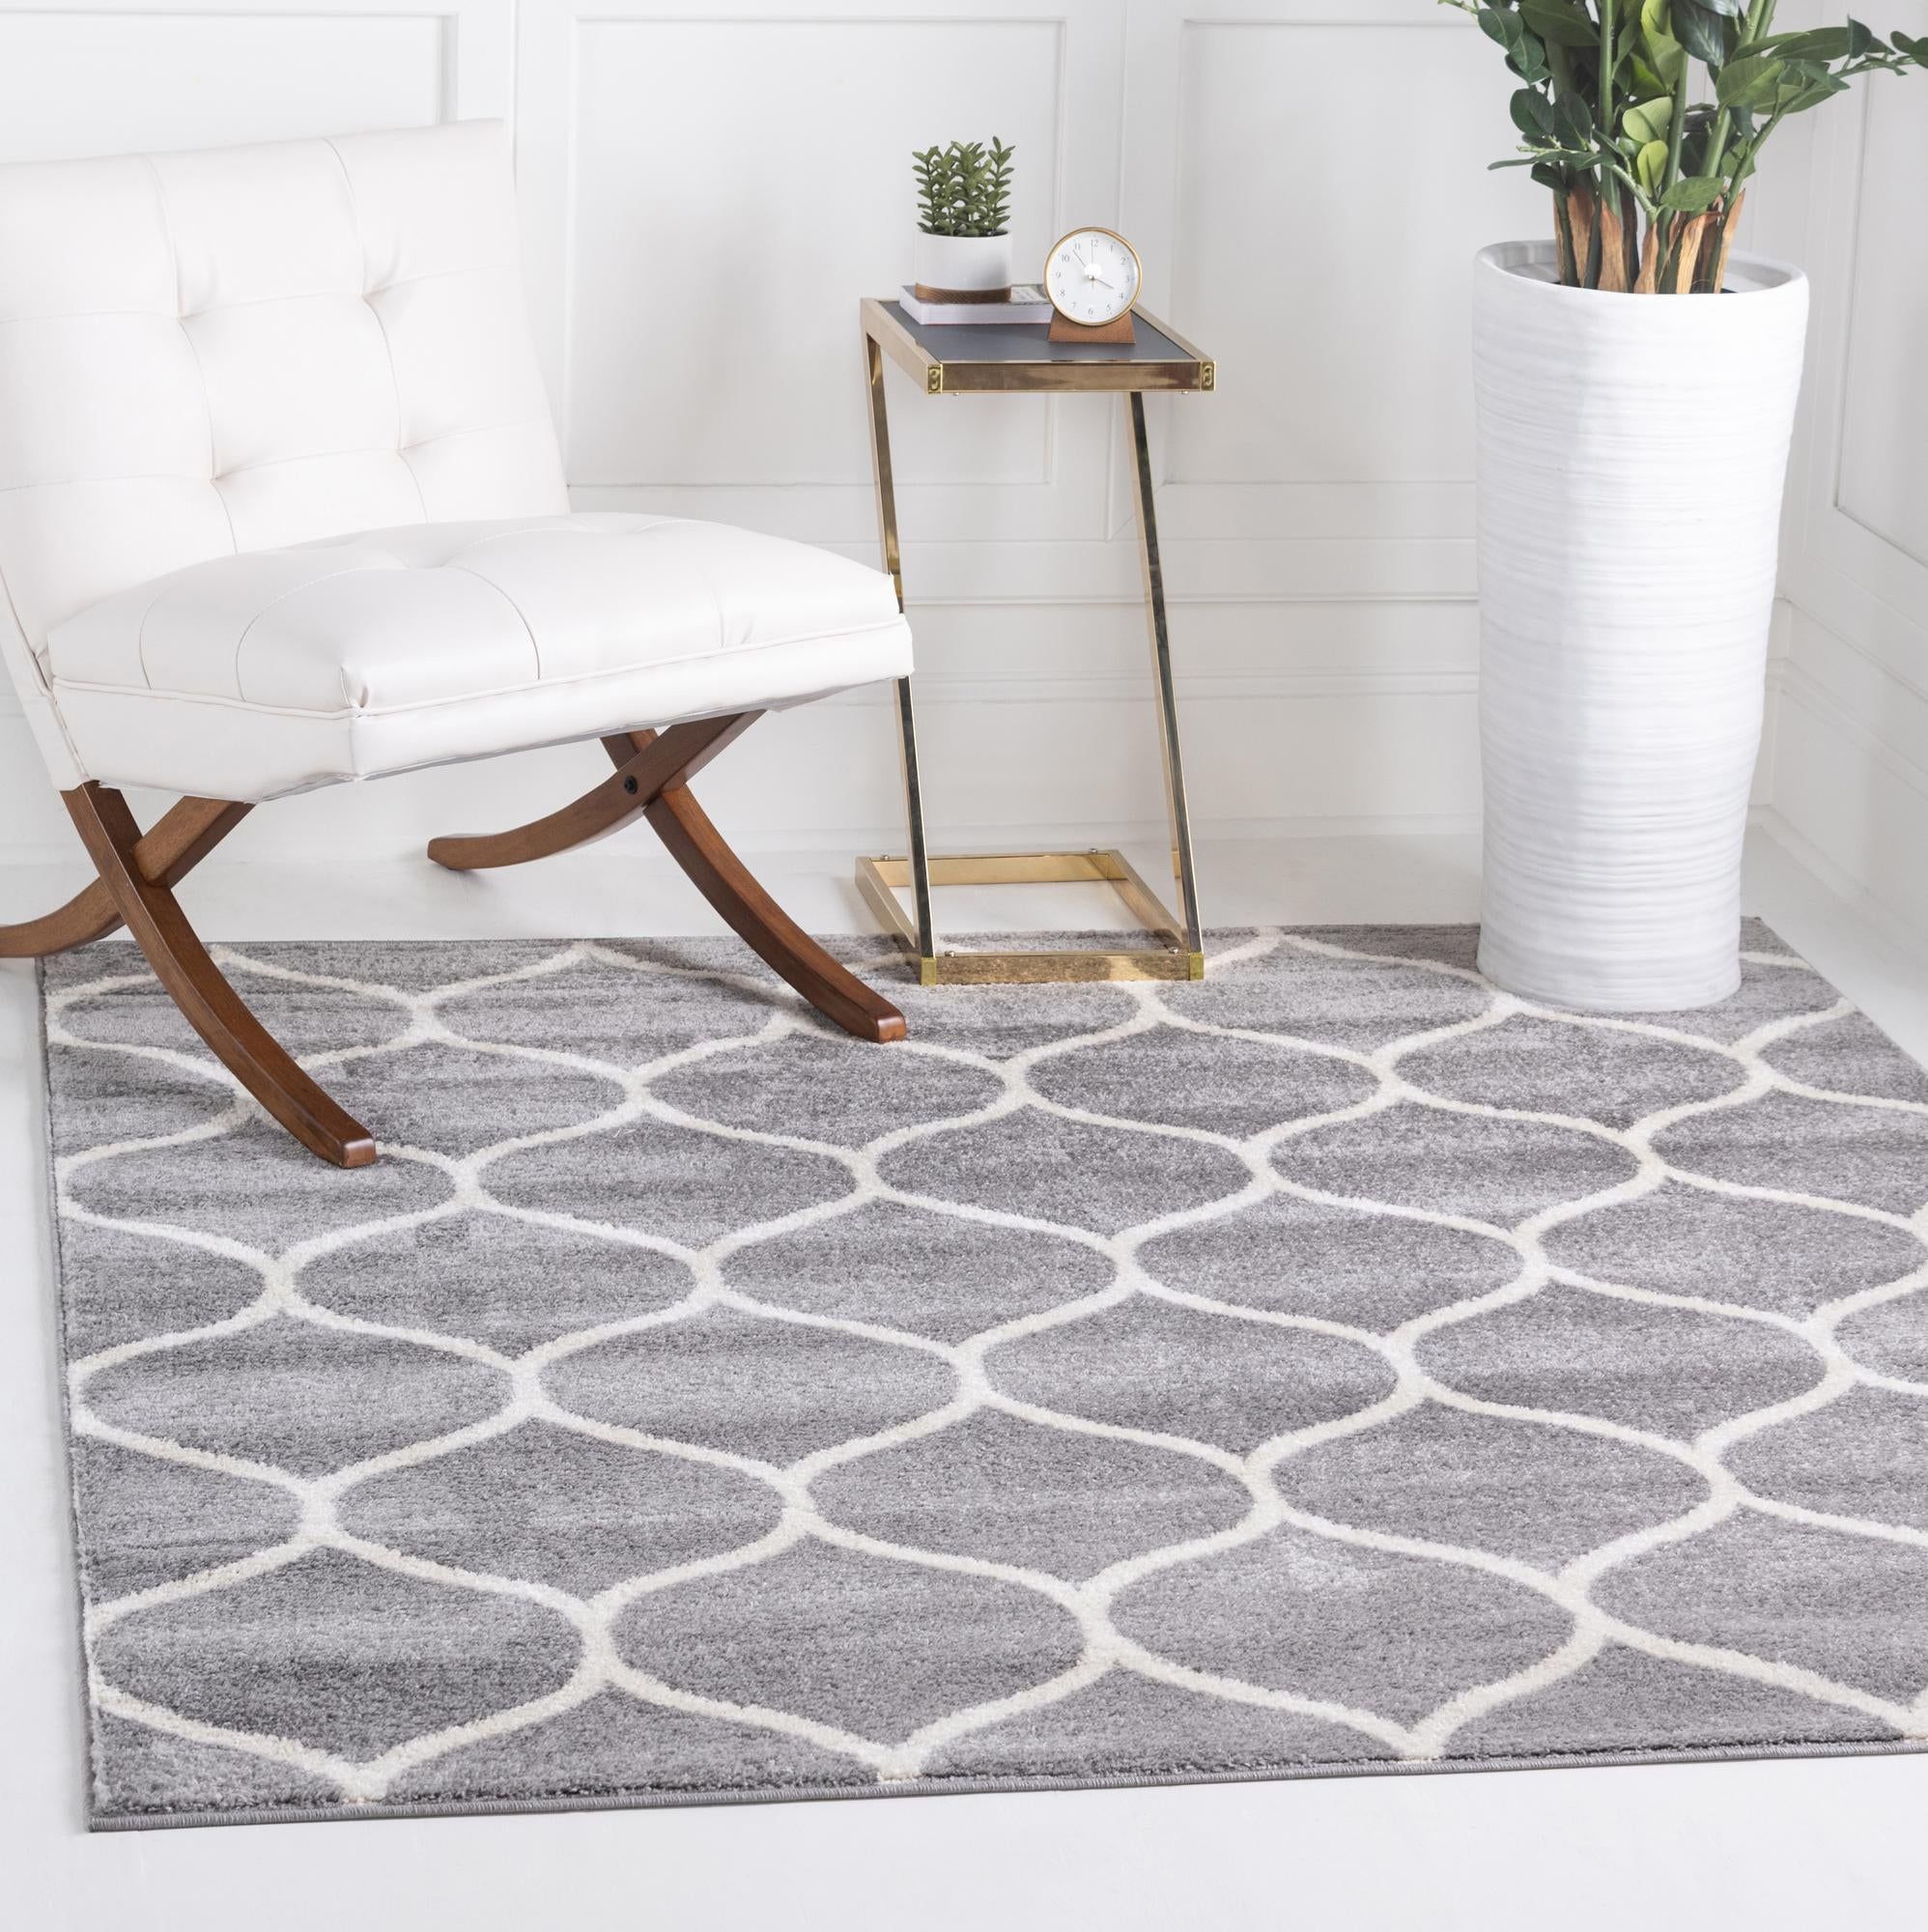 Unique Loom Rounded Trellis Frieze Rug Light Gray/ivory 7' 1" Square  Trellis Traditional Perfect For Dining Room Living Room Bed Room Kids Room  – Walmart Regarding Frieze Square Rugs (View 2 of 15)